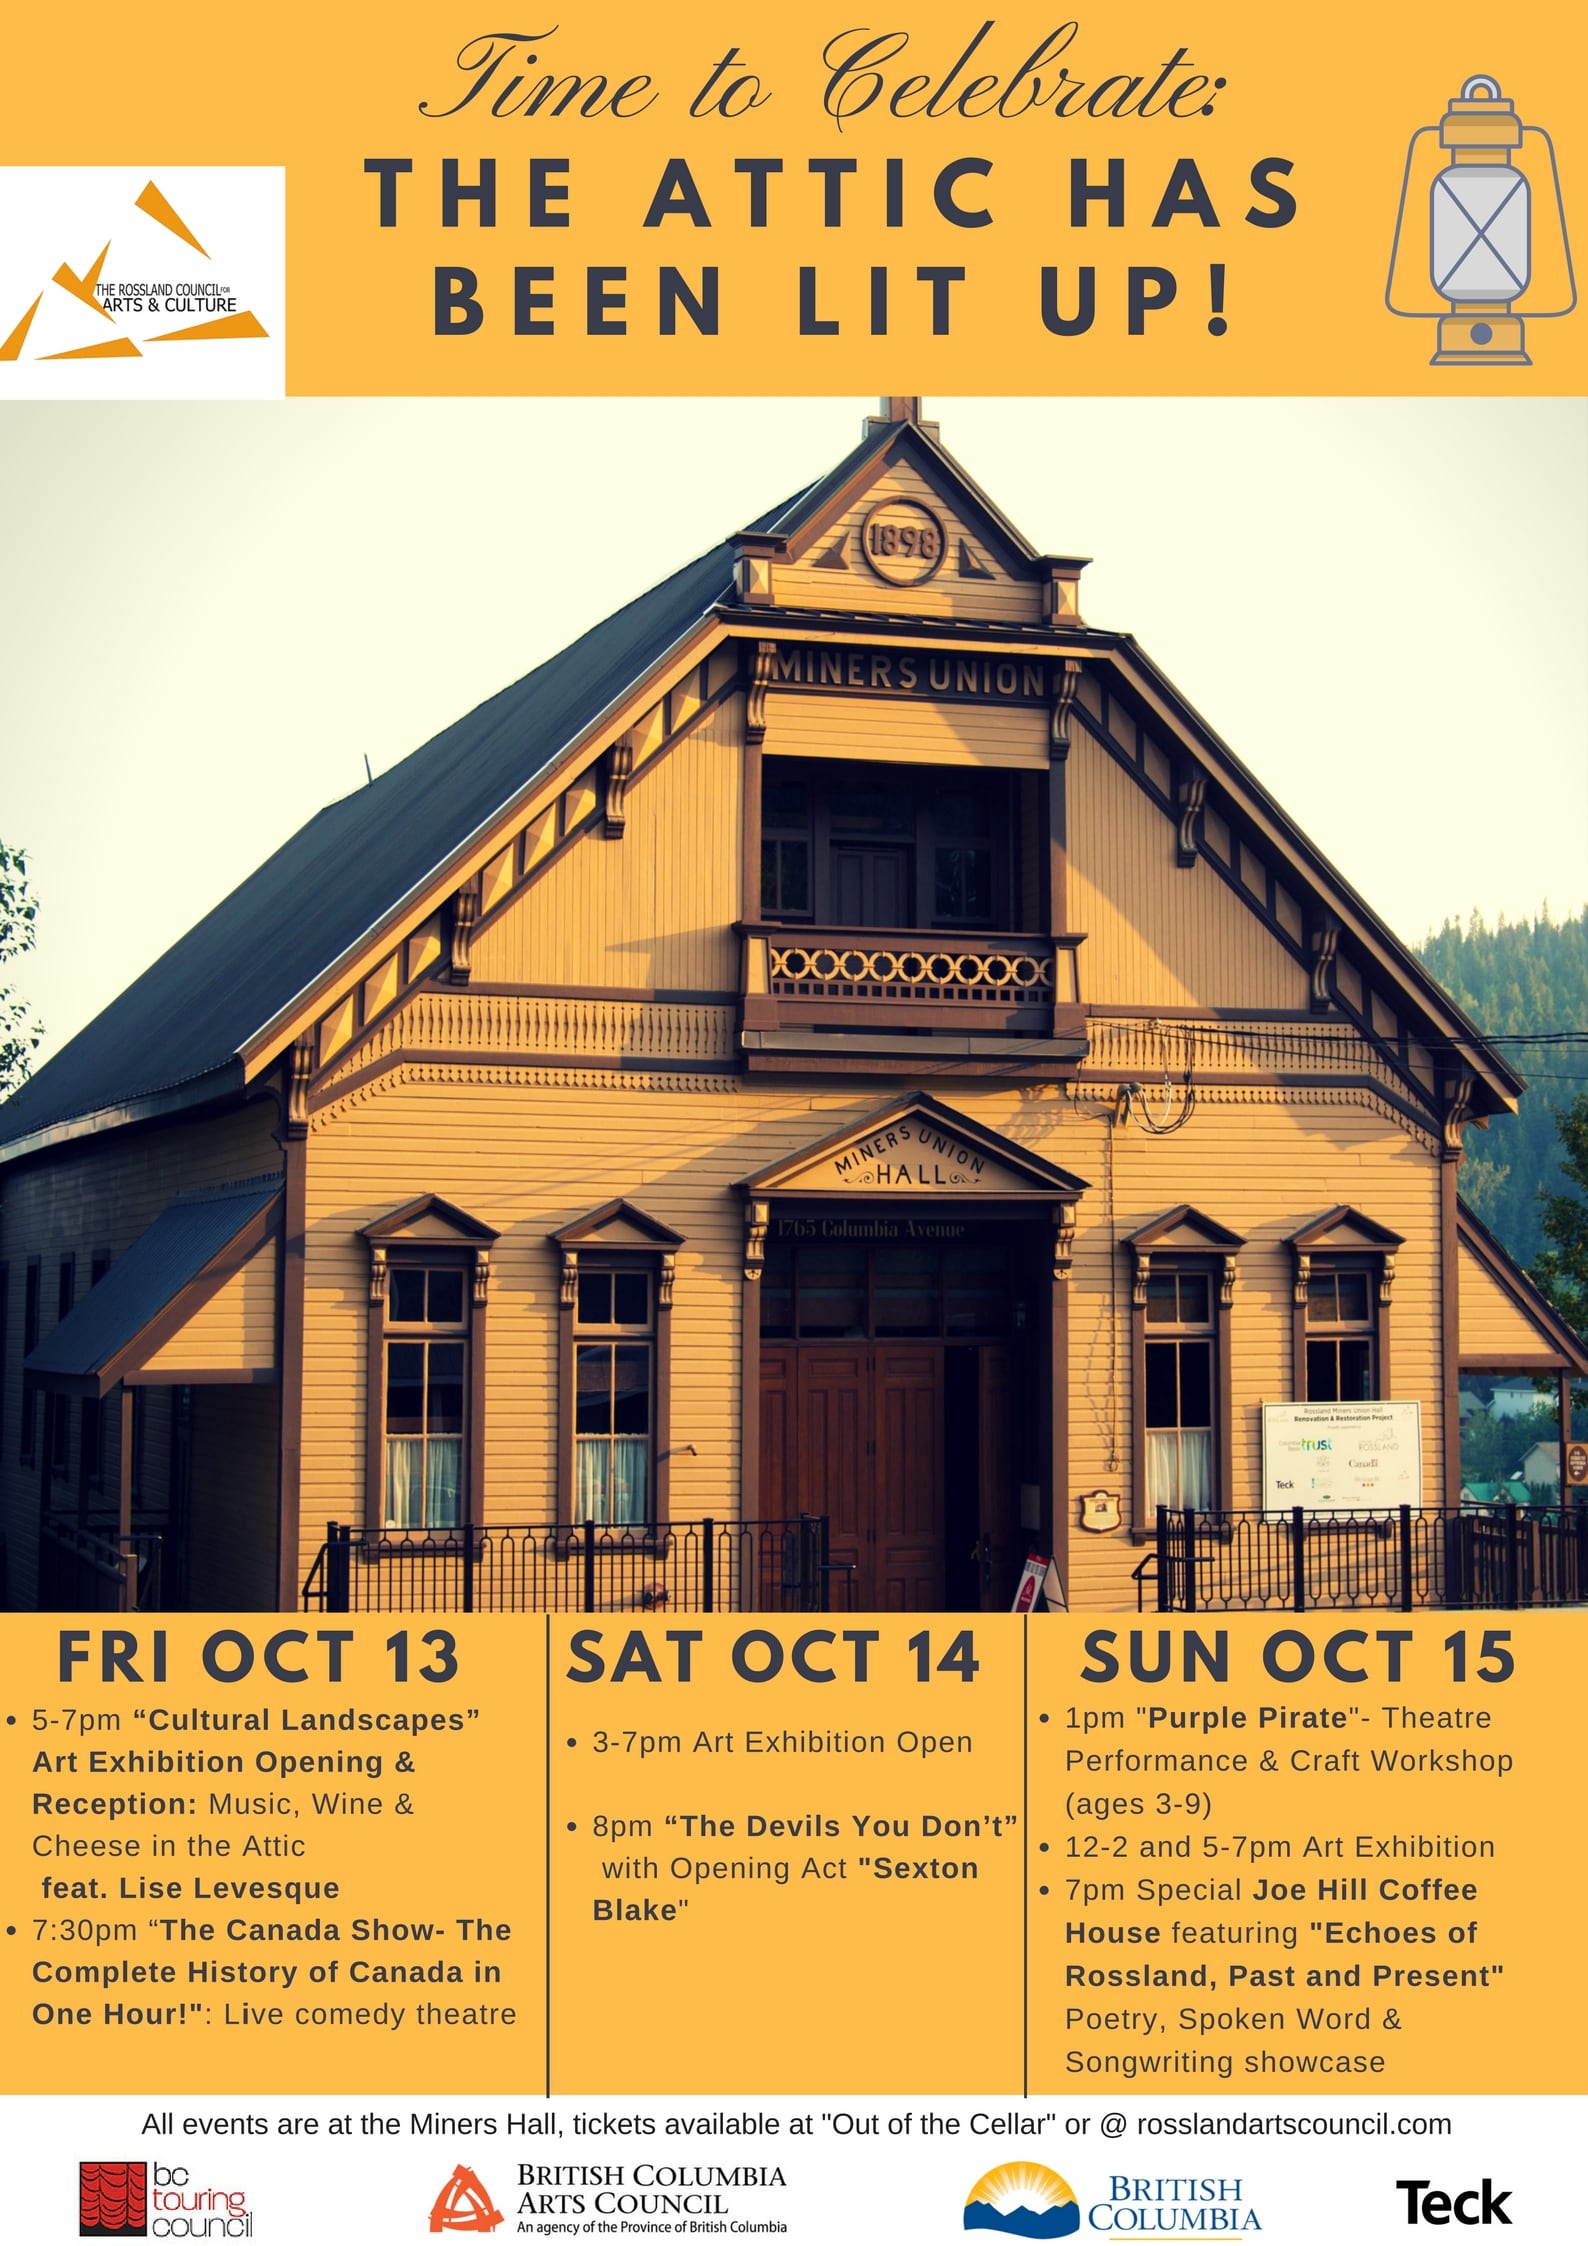 CANADA 150 CELEBRATIONS on October 15 at the Miners Hall and Strawberry Pass